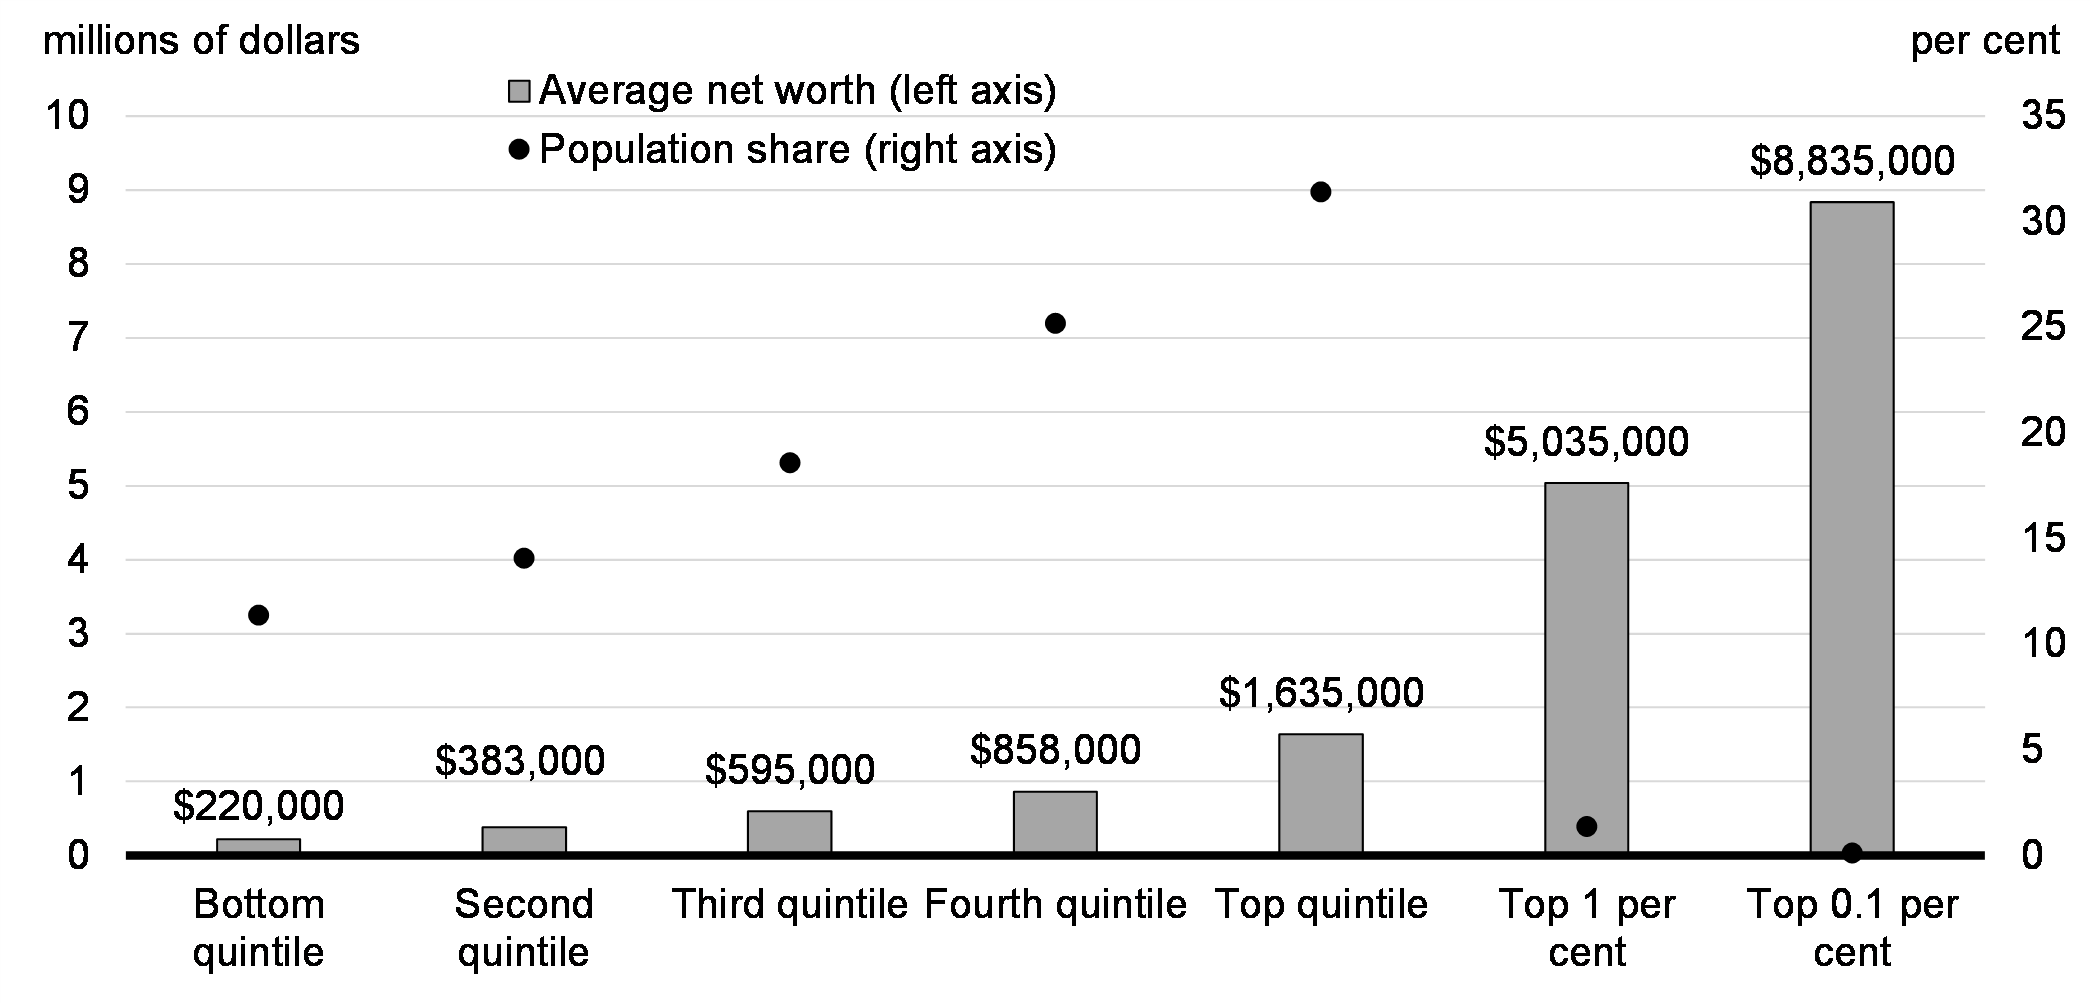 Chart 8.1: Average Family Net Worth by Income Group, 2019